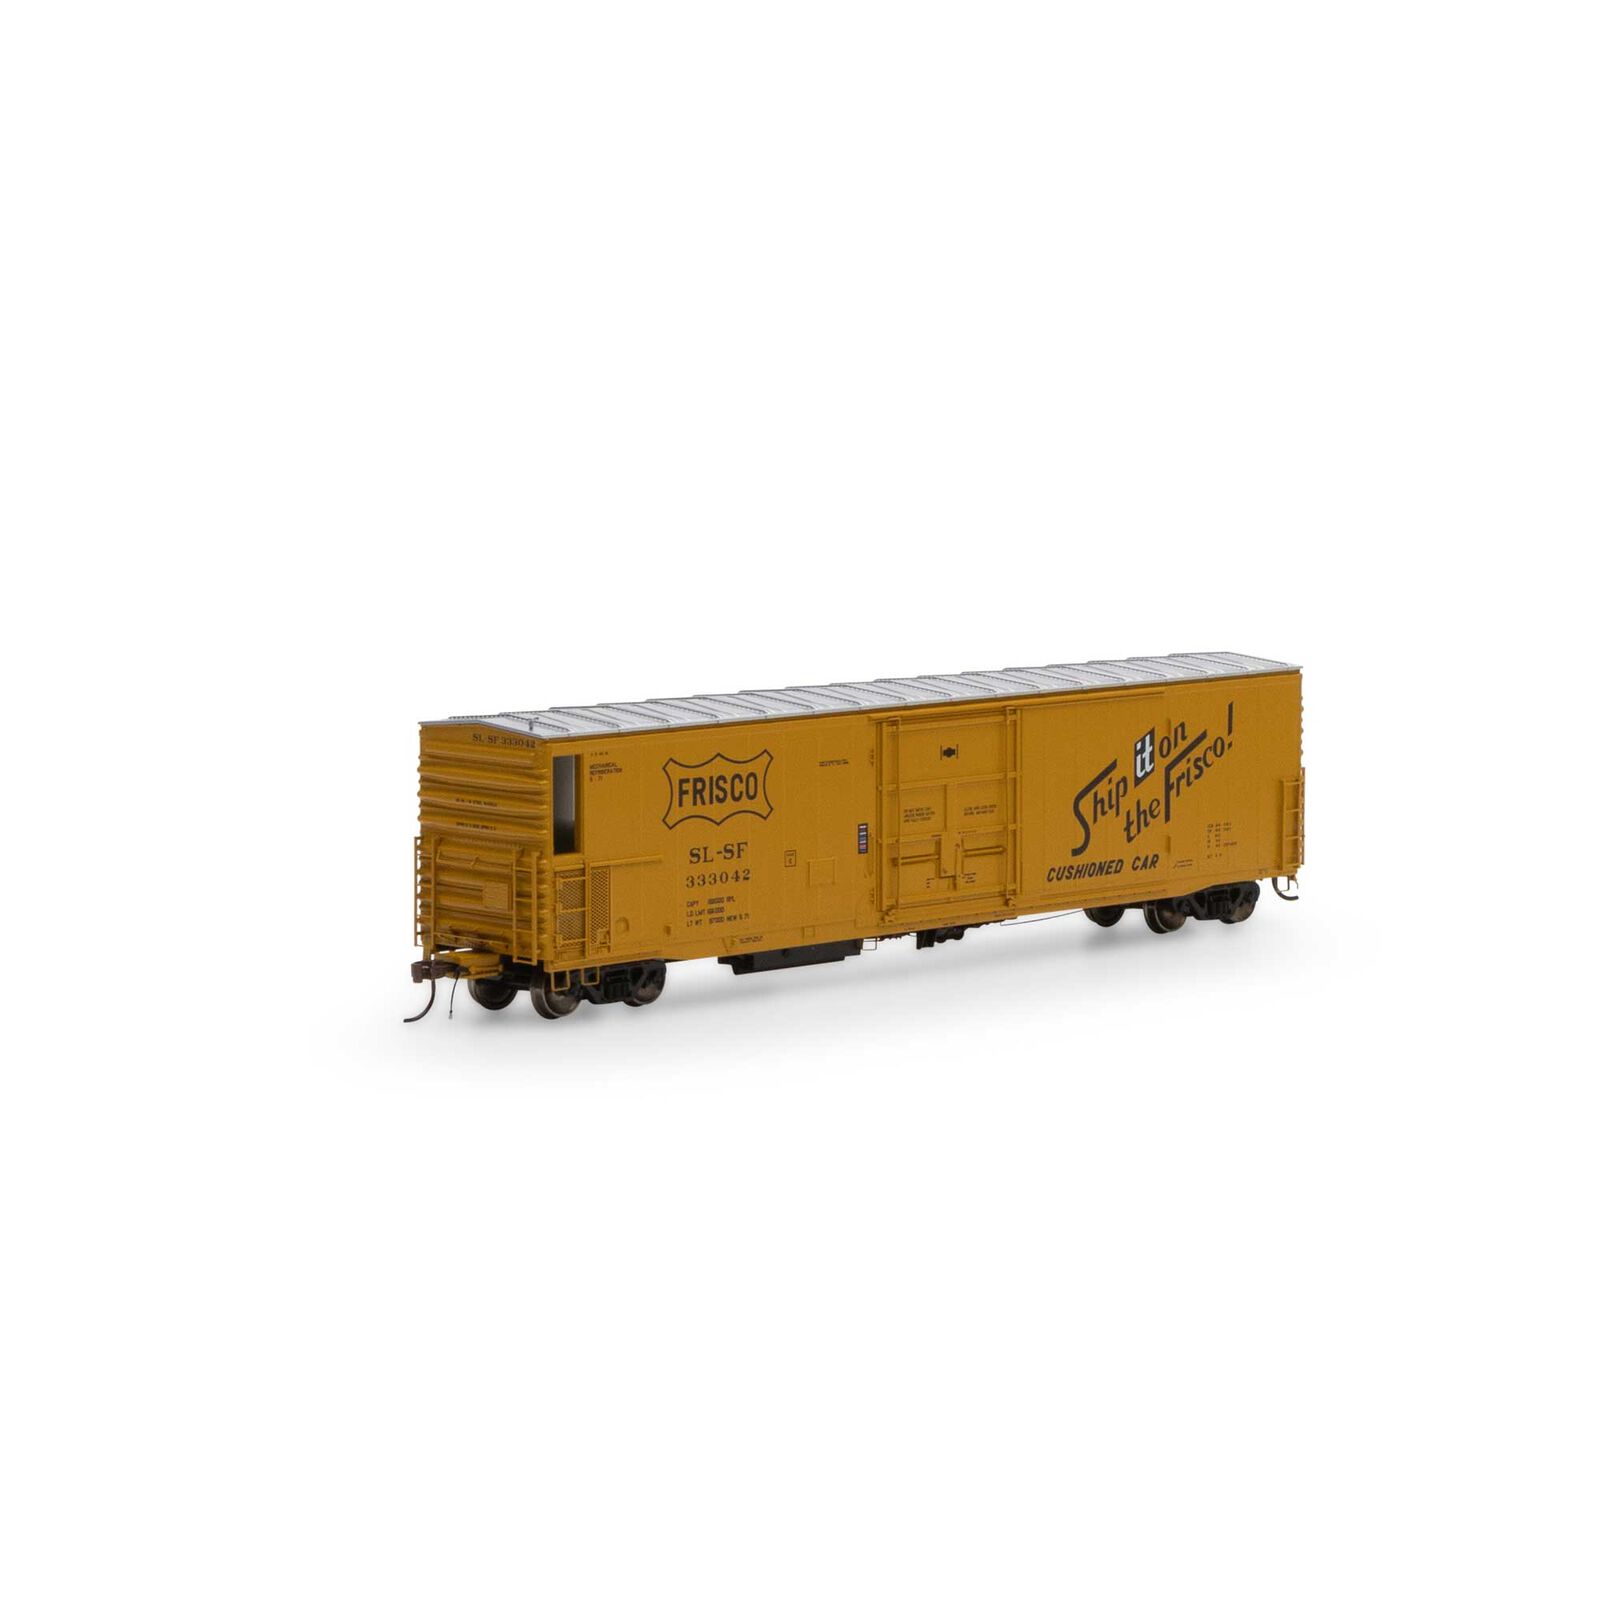 HO FGE 57' Mechanical Reefer with Sound, SLSF #333042